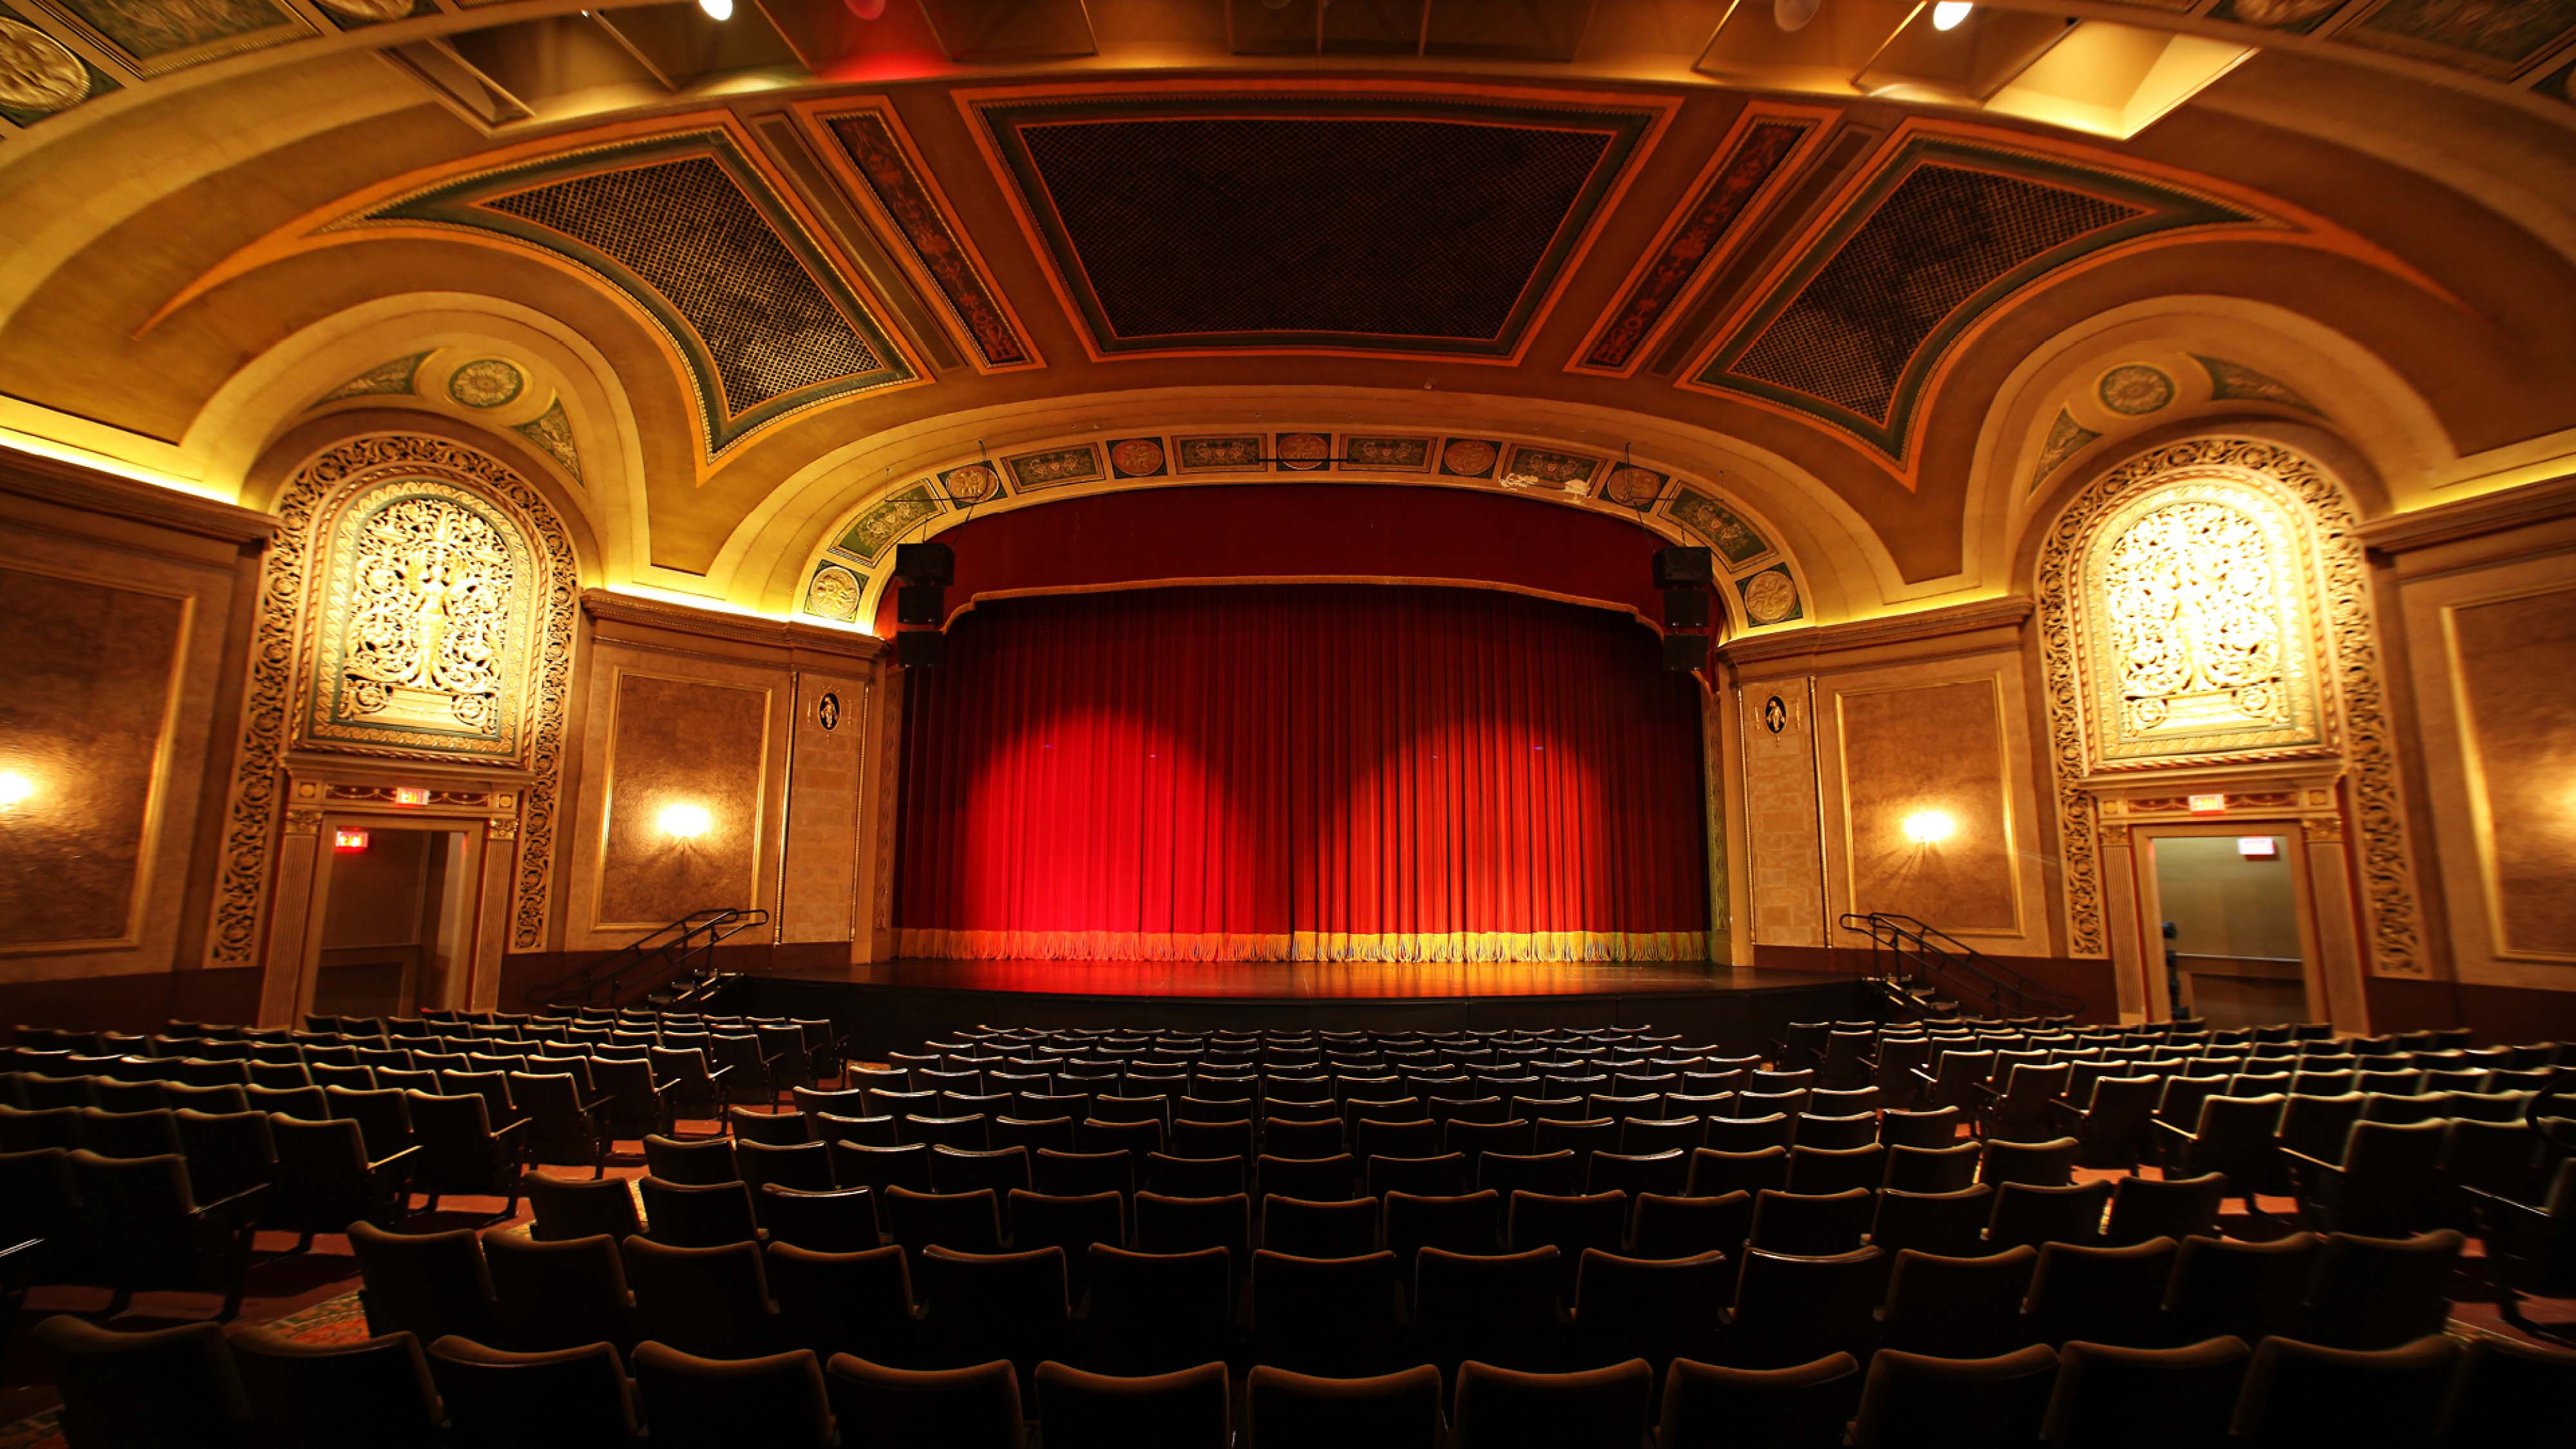 Interior view of Pentastar Theatre, the largest contemporary venue within Windsor’s Capitol Theatre featuring vaulted amber-coloured ceilings decorated with a border motif and a red velvet curtain.